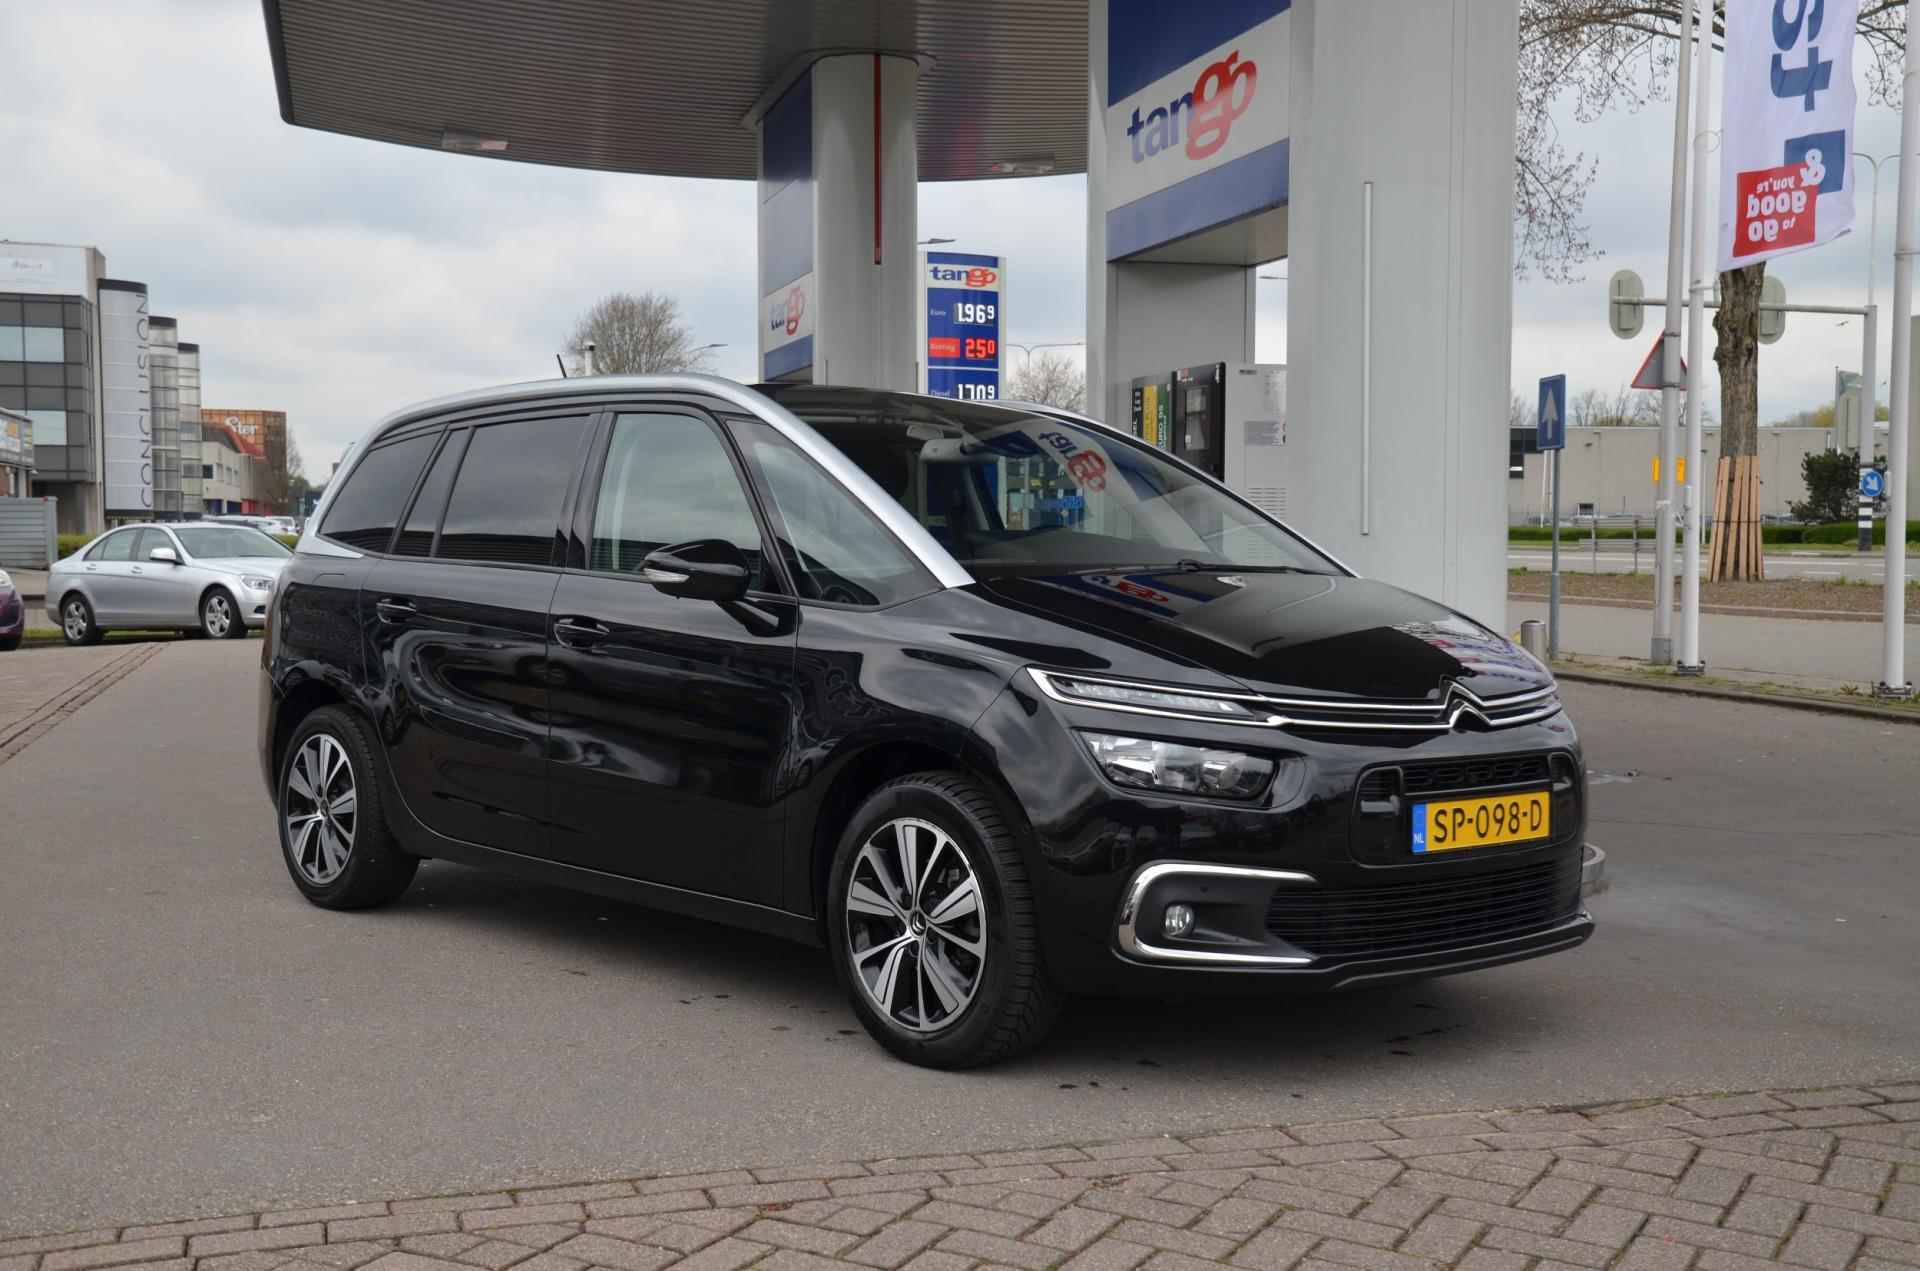 Citroen Grand C4 Picasso 1.2 7 PERS|7 PERSOONS|2E PAASDAG OPEN. - 6/30